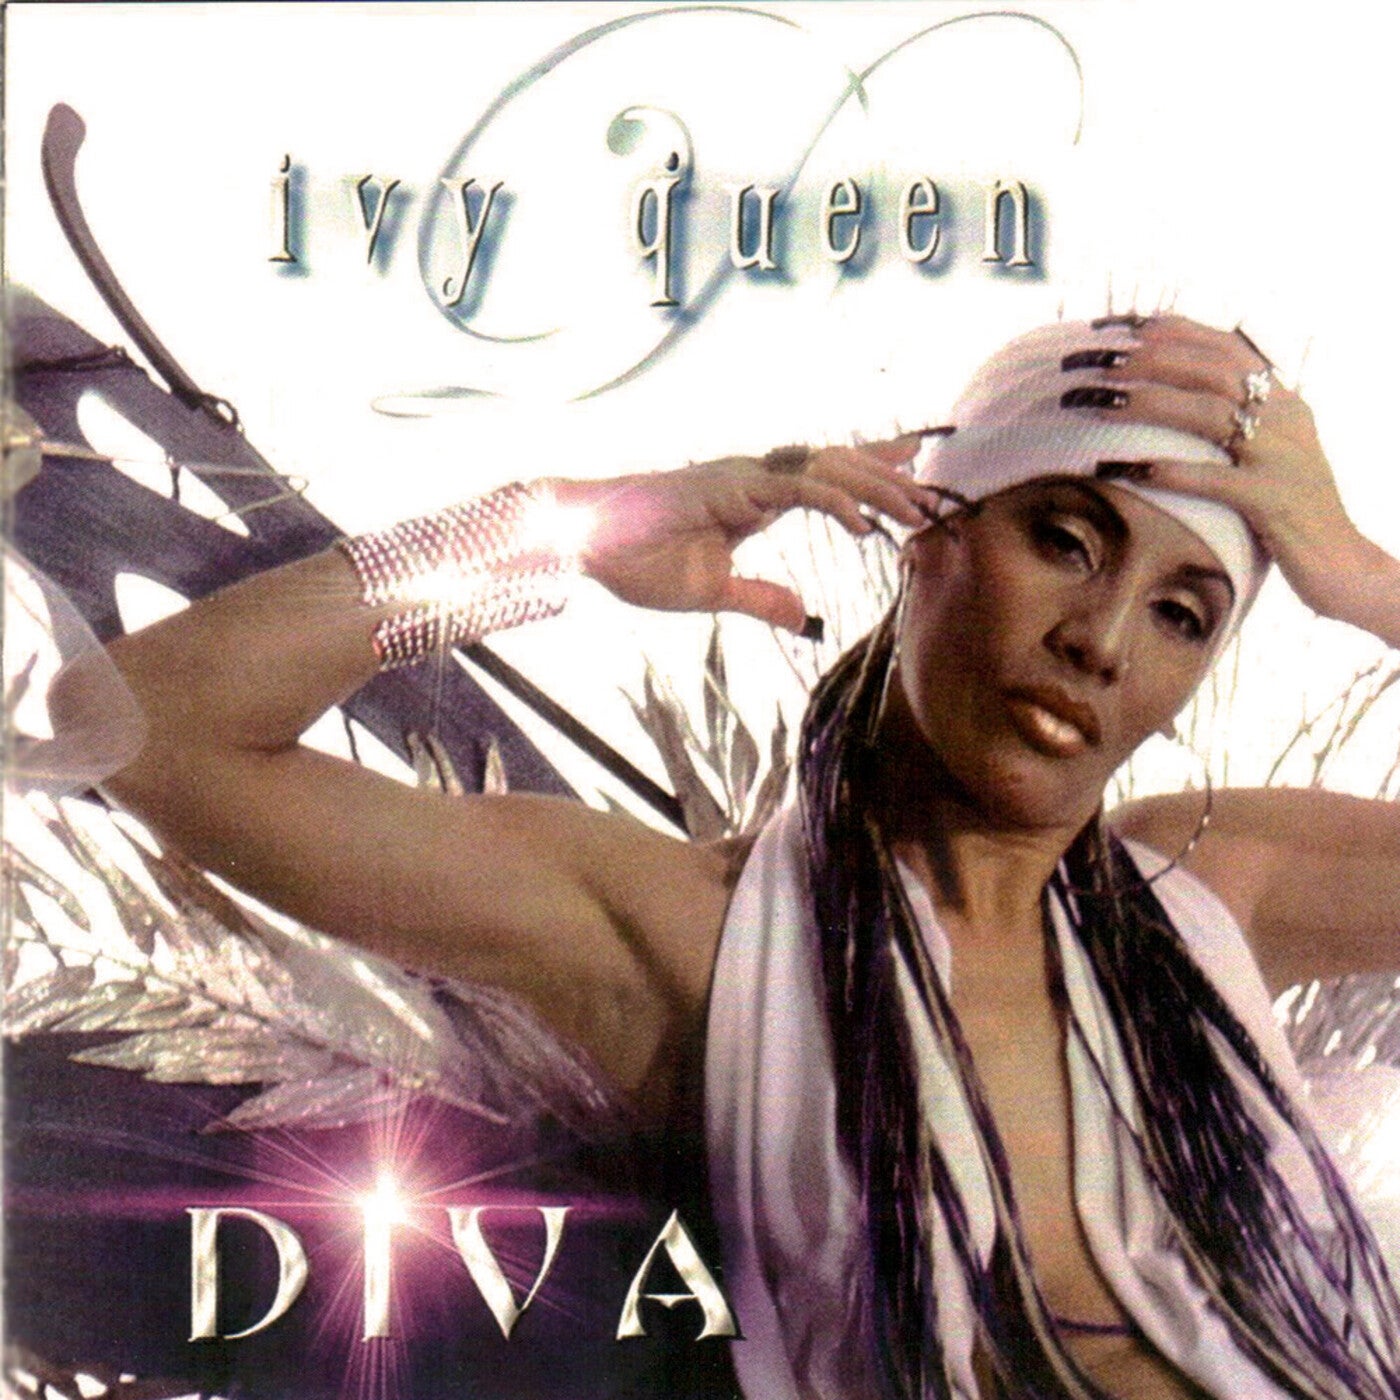 Báilame by Ivy Queen on Beatsource